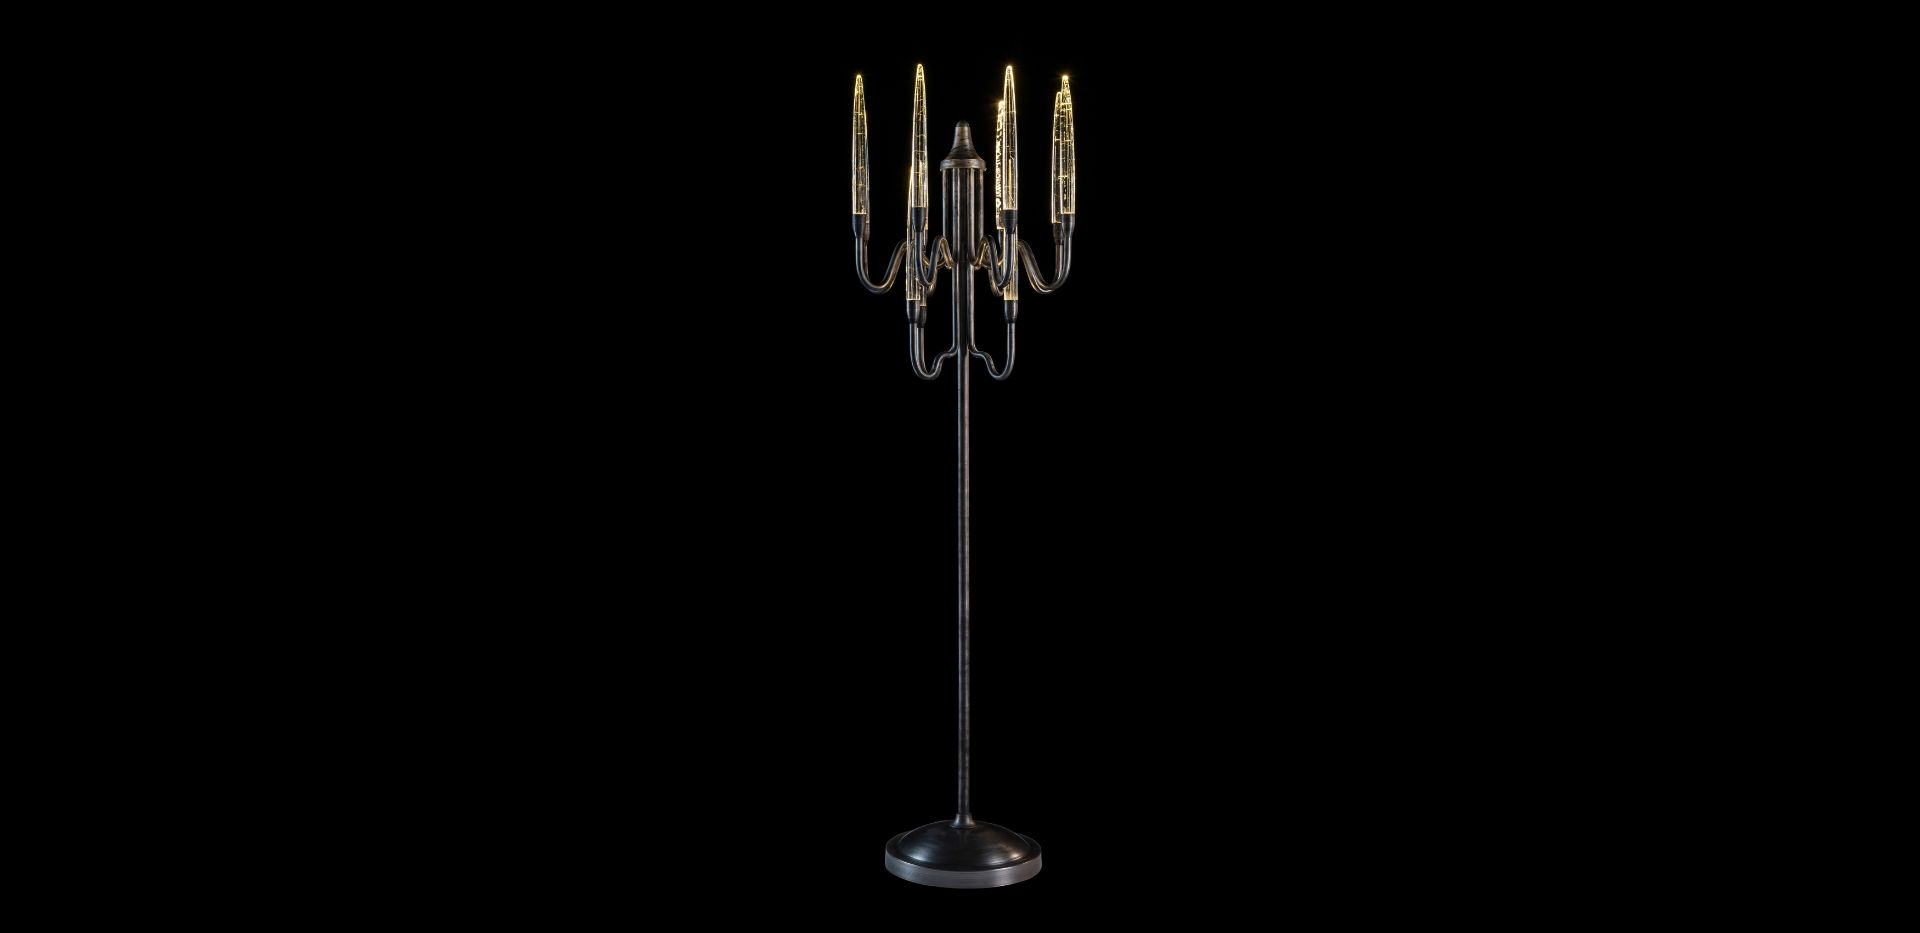 Stalagmite Floor Lamp-Natural 53 X 53 X 176cm Inspired By The Crystallised Rock Formations That Grow - Image 2 of 2